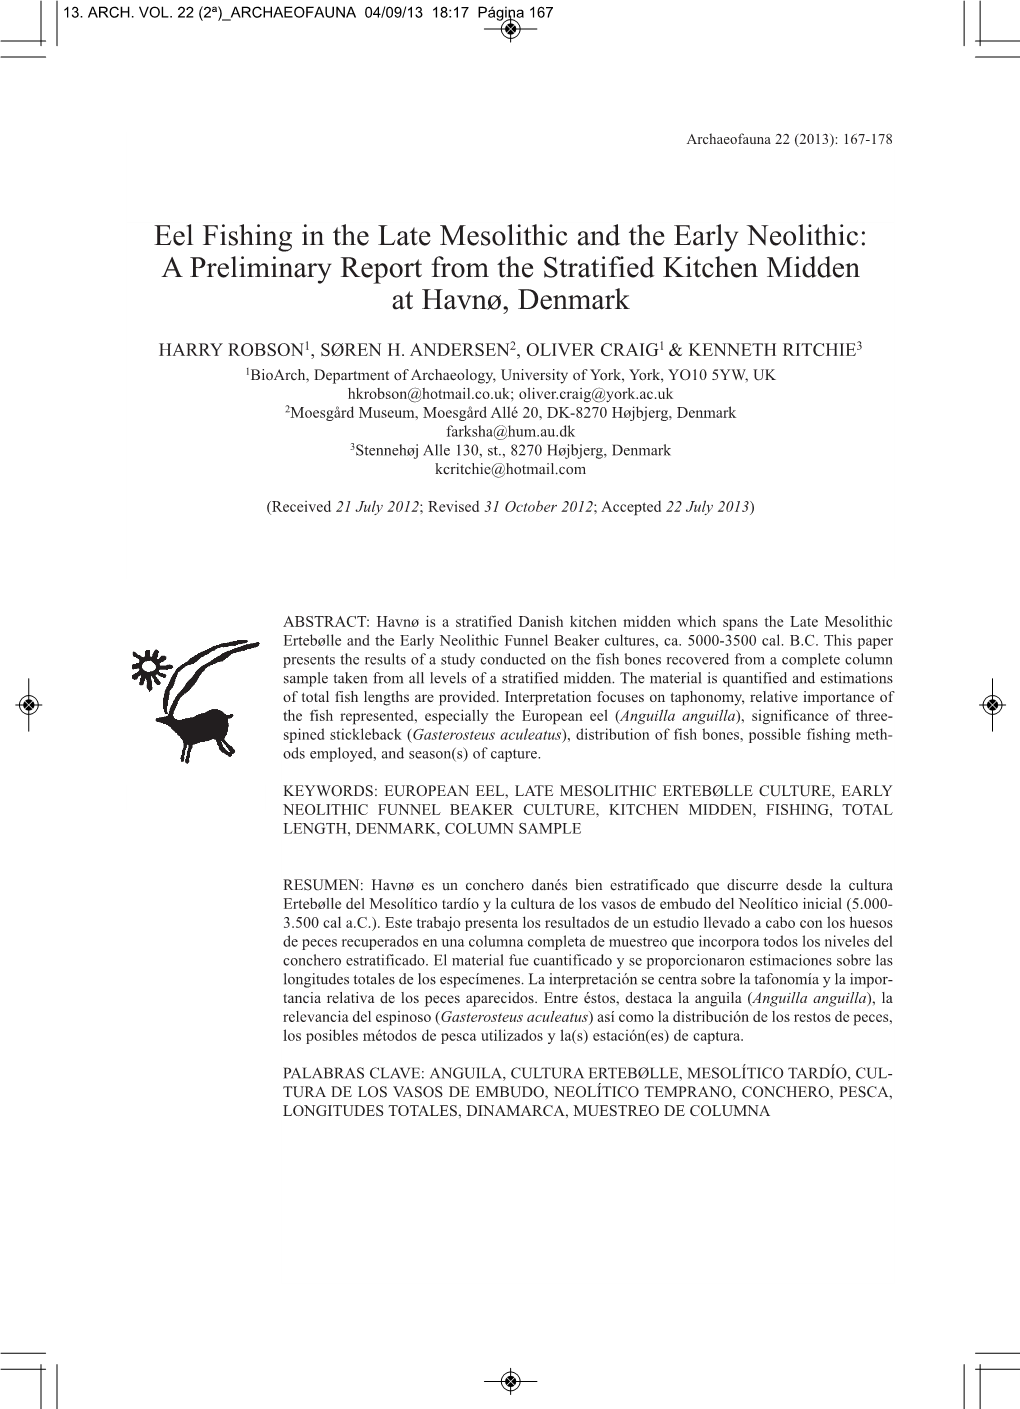 Eel Fishing in the Late Mesolithic and the Early Neolithic: a Preliminary Report from the Stratified Kitchen Midden at Havnø, Denmark